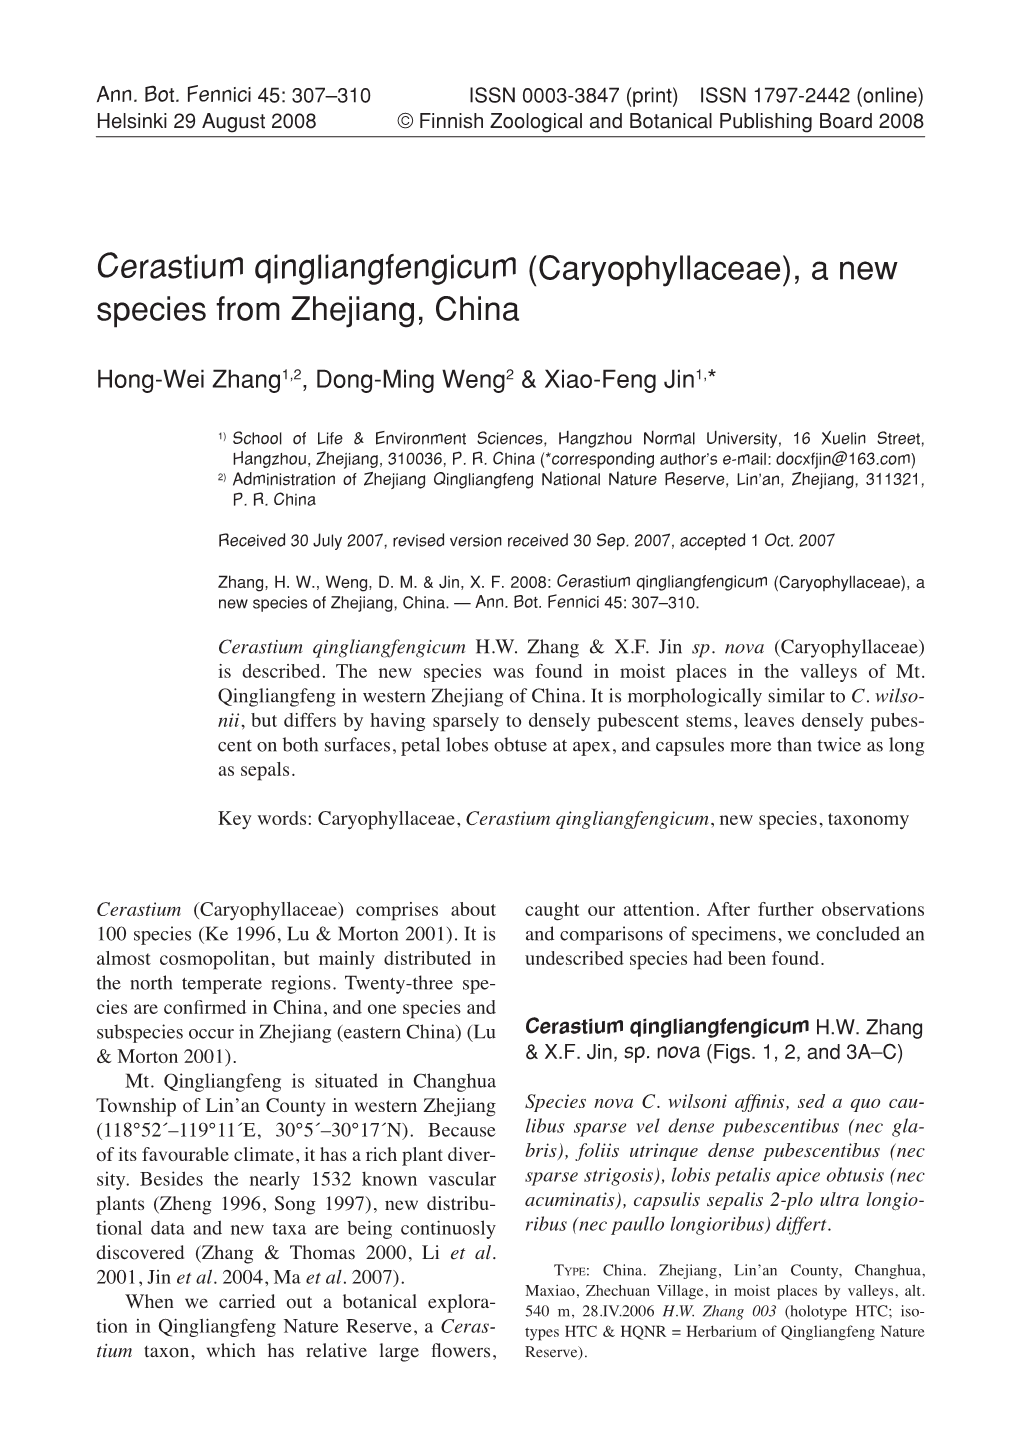 Cerastium Qingliangfengicum (Caryophyllaceae), a New Species from Zhejiang, China